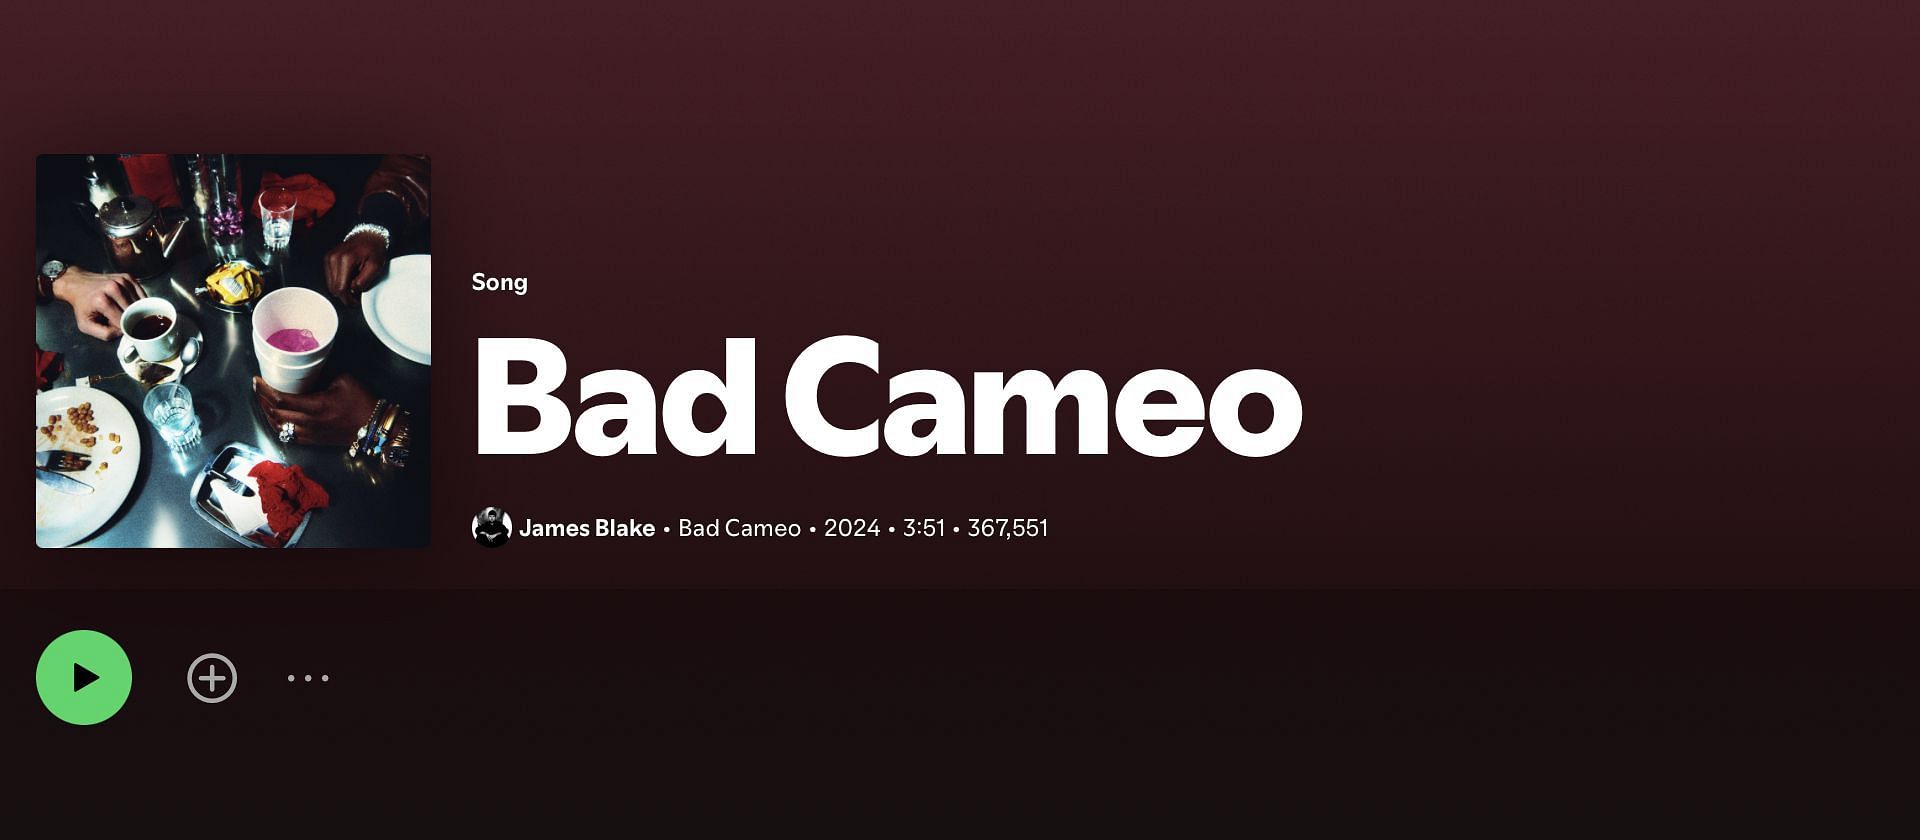 Track 5 of Yachty and Blake&#039;s collaboration album &#039;Bad Cameo&#039; (Image via Spotify)